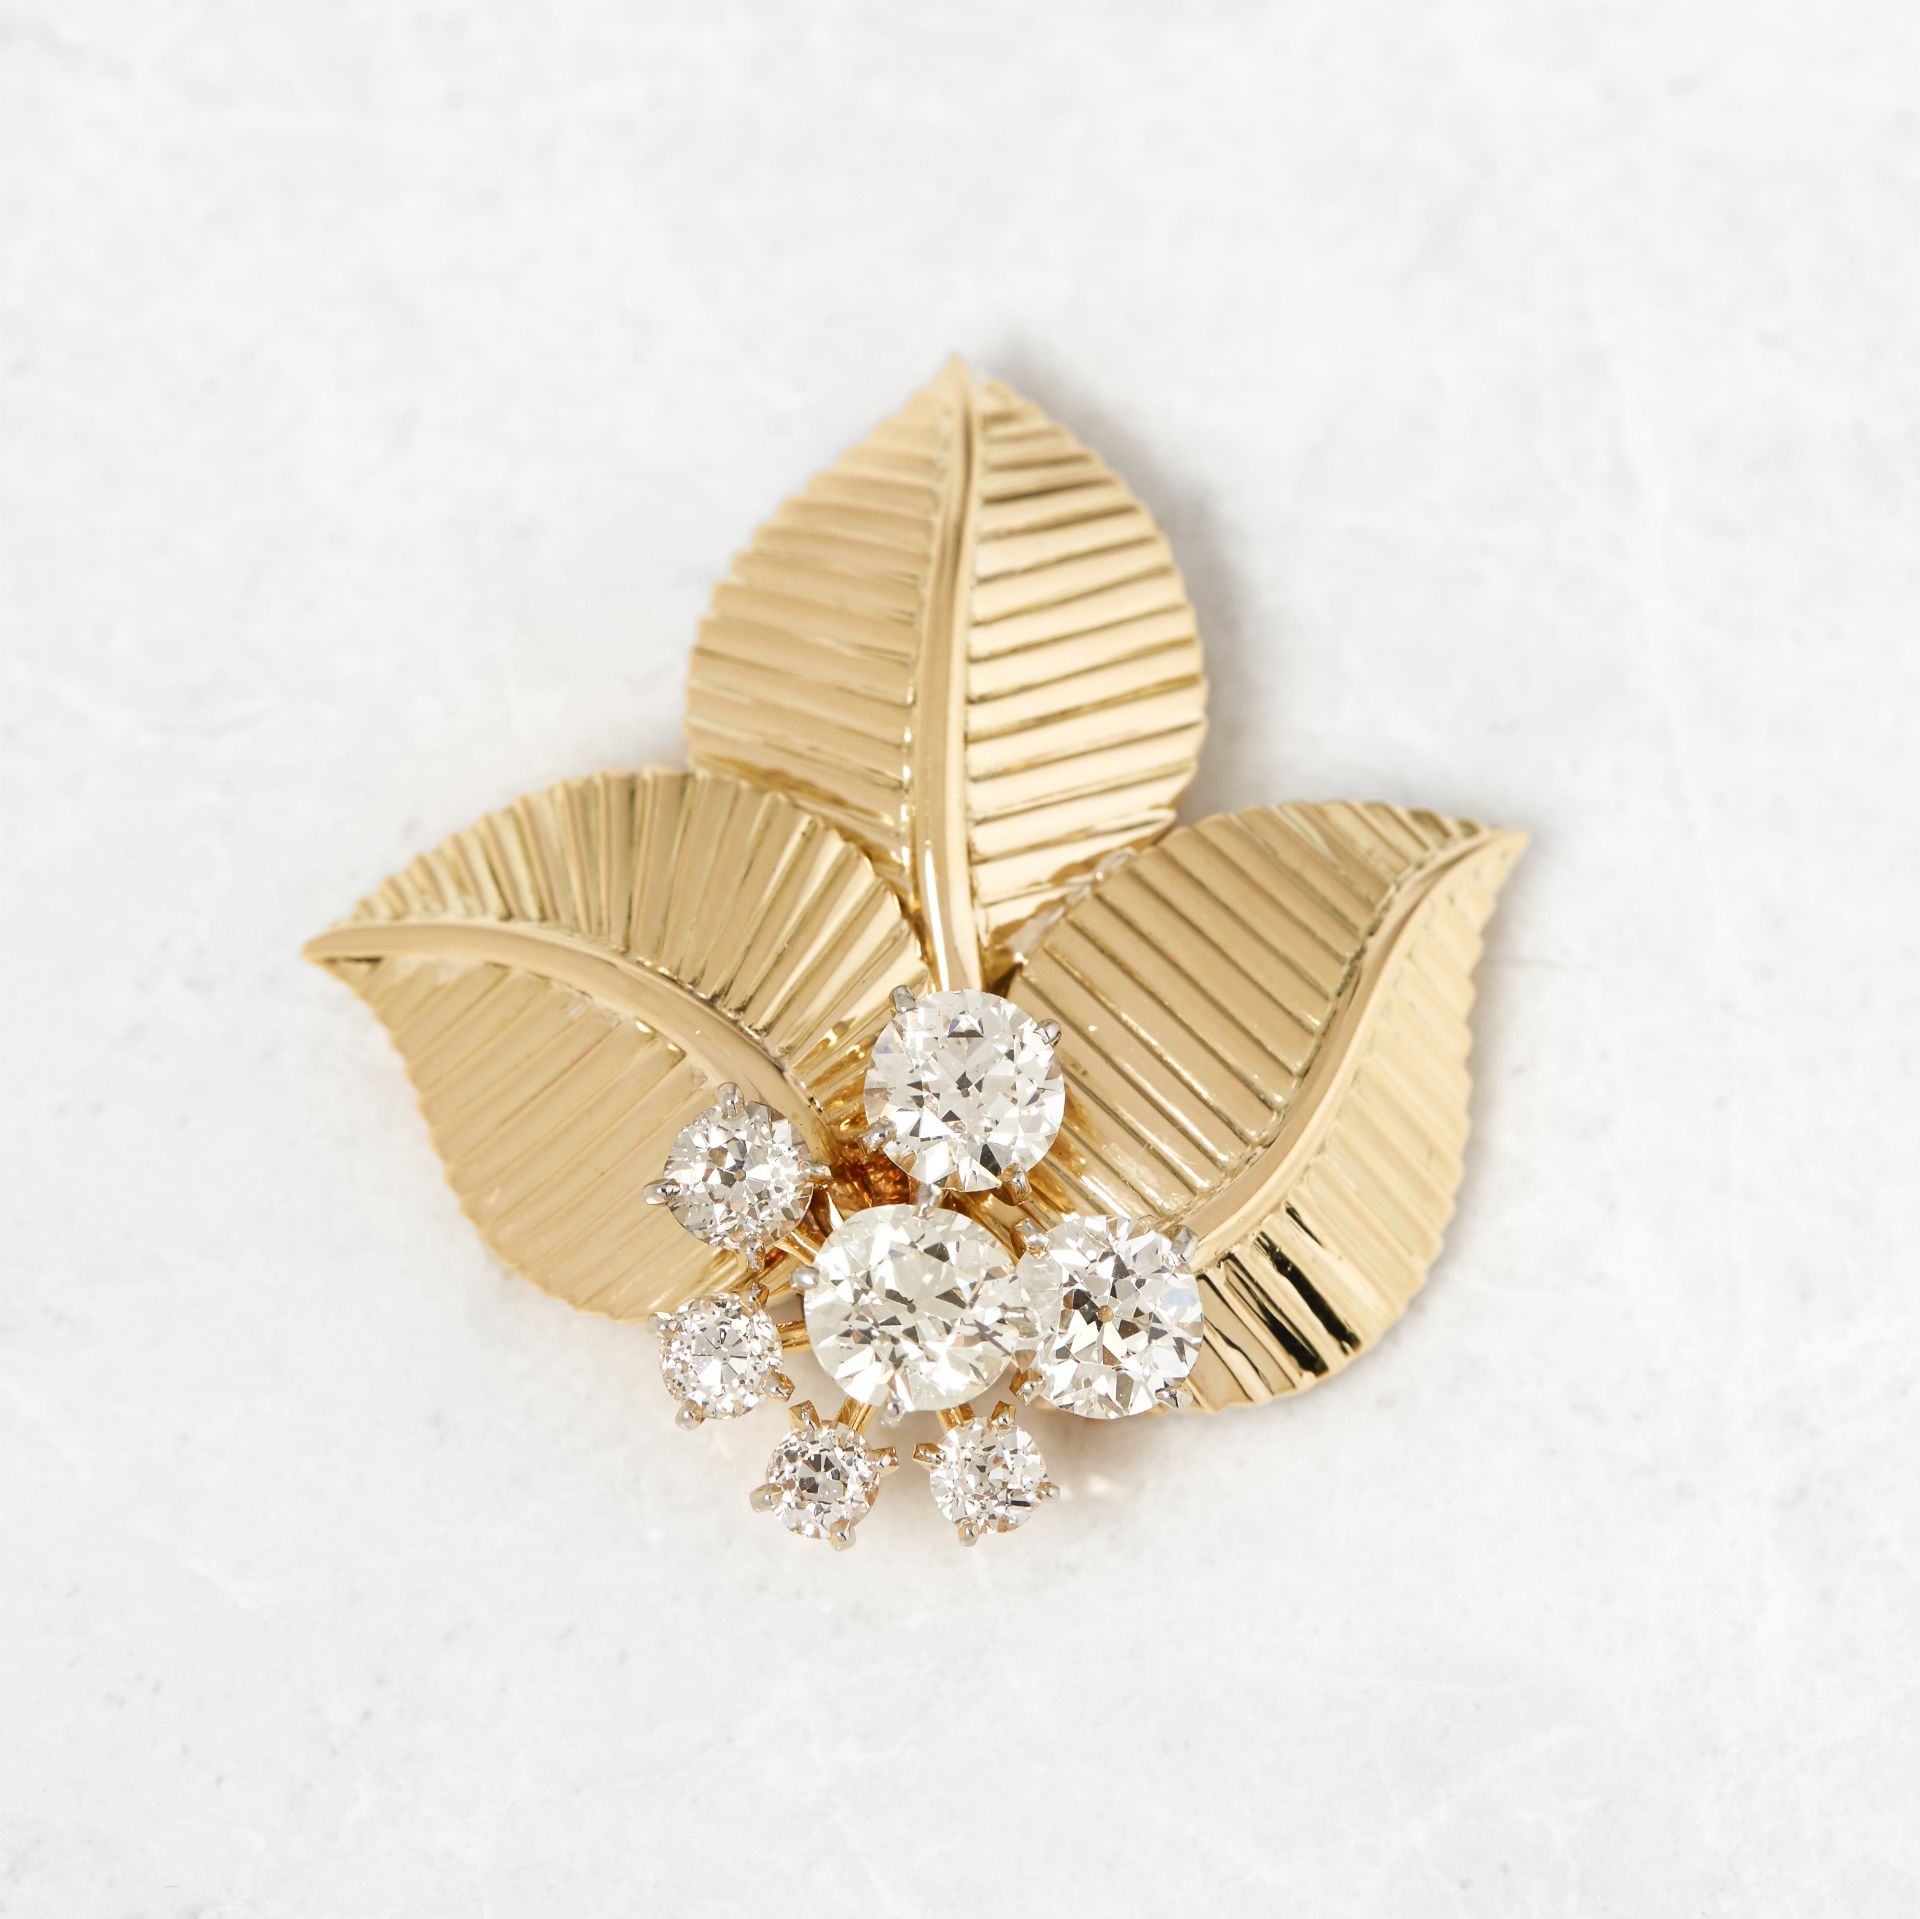 Cartier 18k Yellow Gold Diamond Vintage Leaf Brooch with Presentation Box - Image 2 of 16